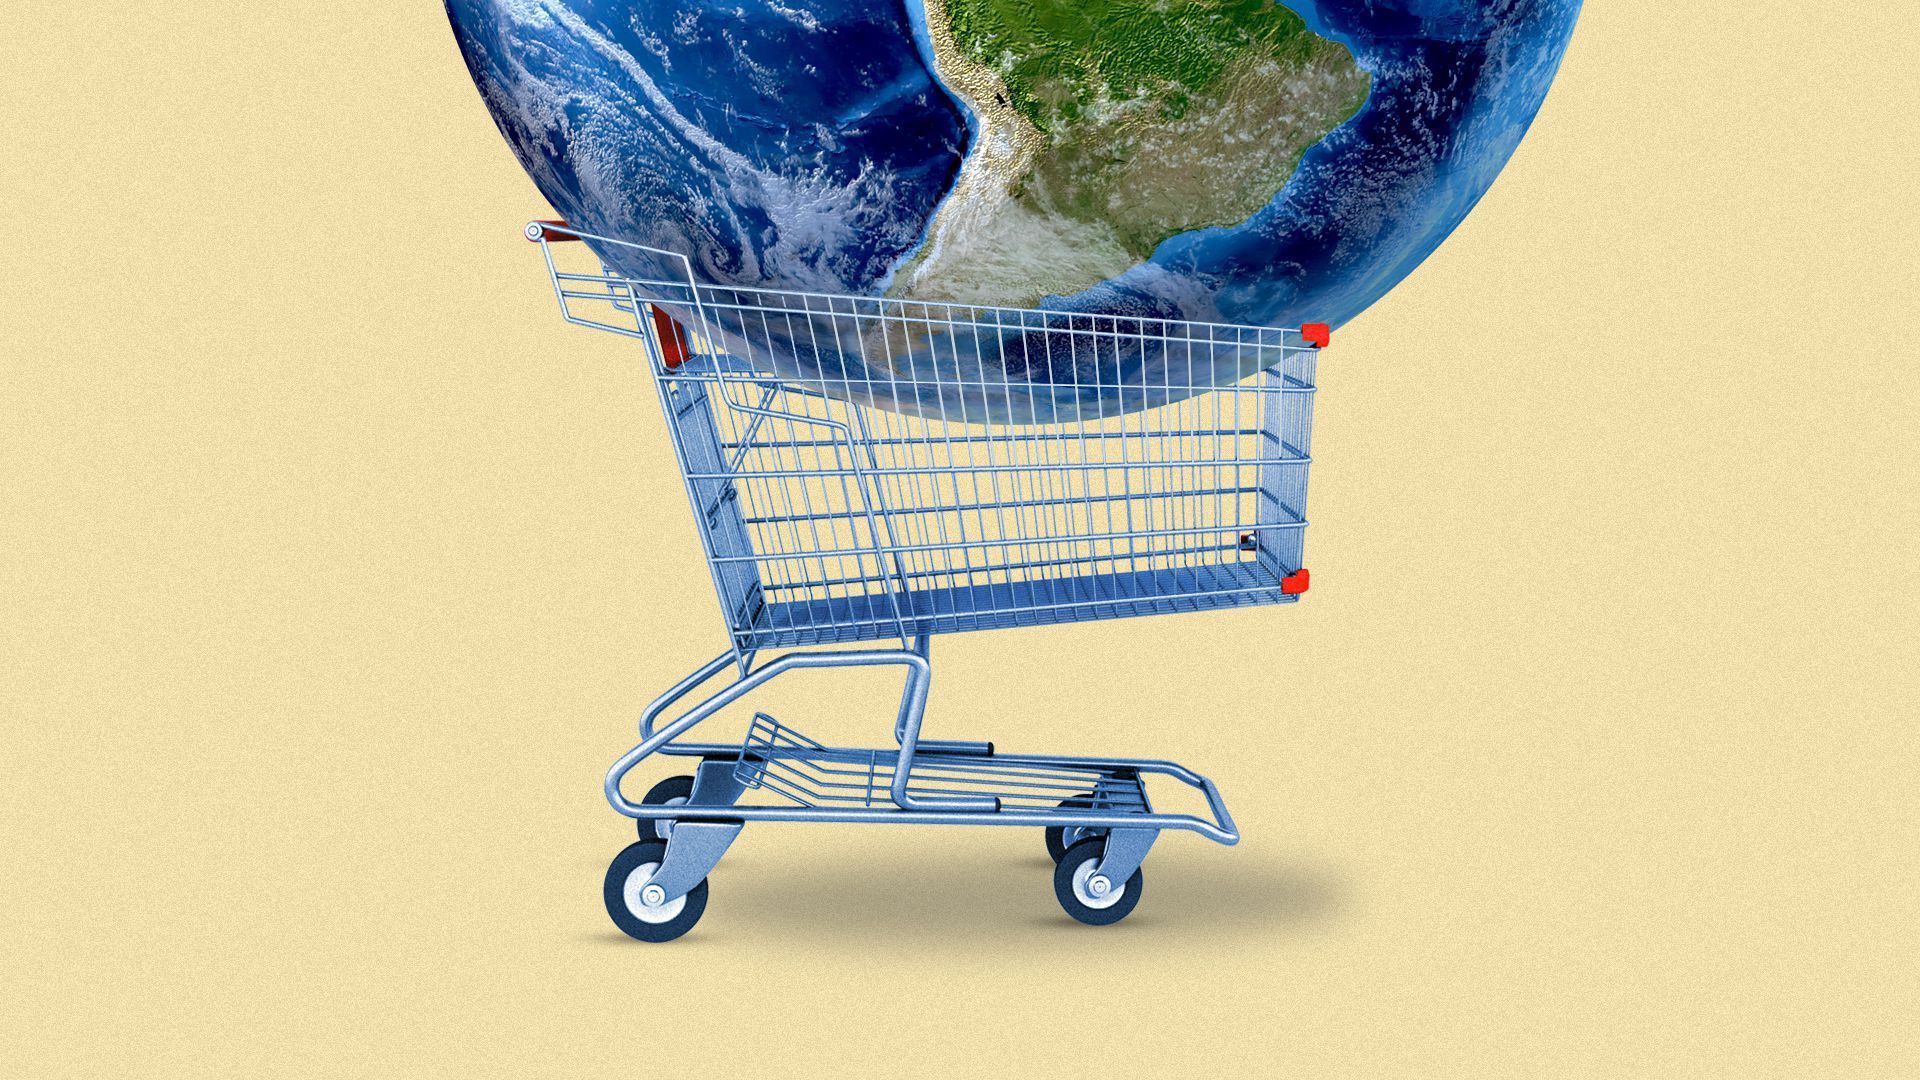 Illustration of the Earth on top of a shopping cart.